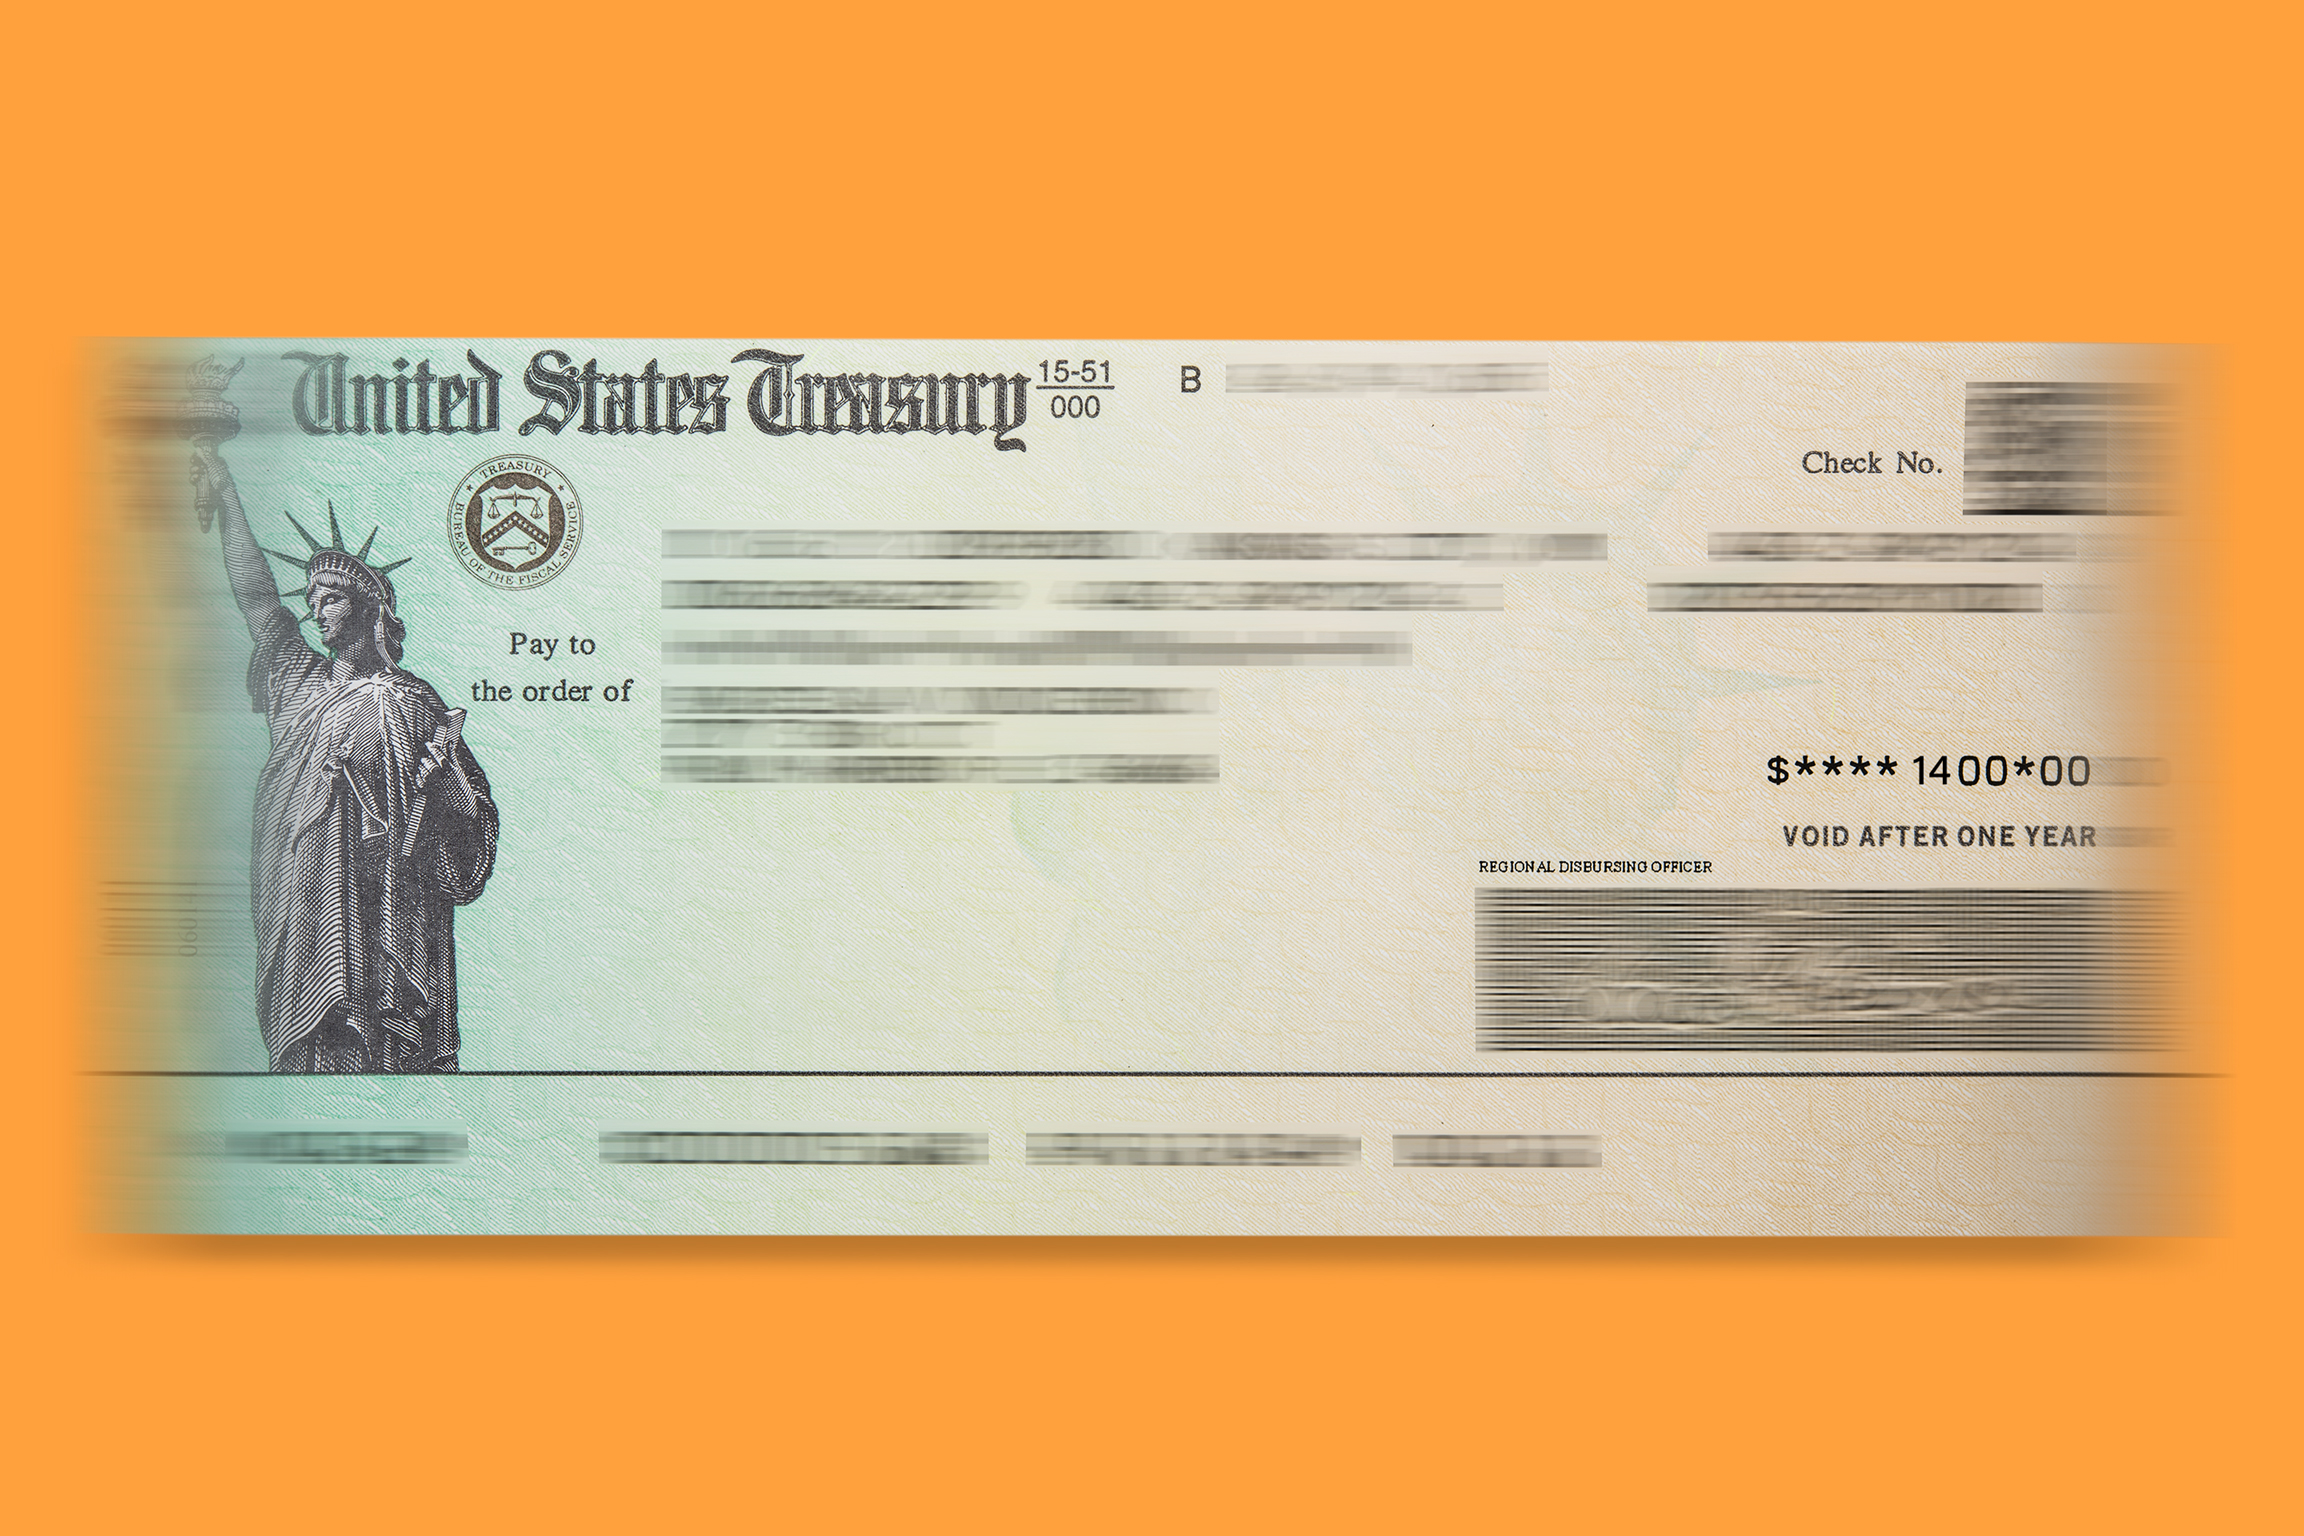 Third Stimulus Check Update: A New Batch of $1,400 Payments Hits Bank Accounts Today